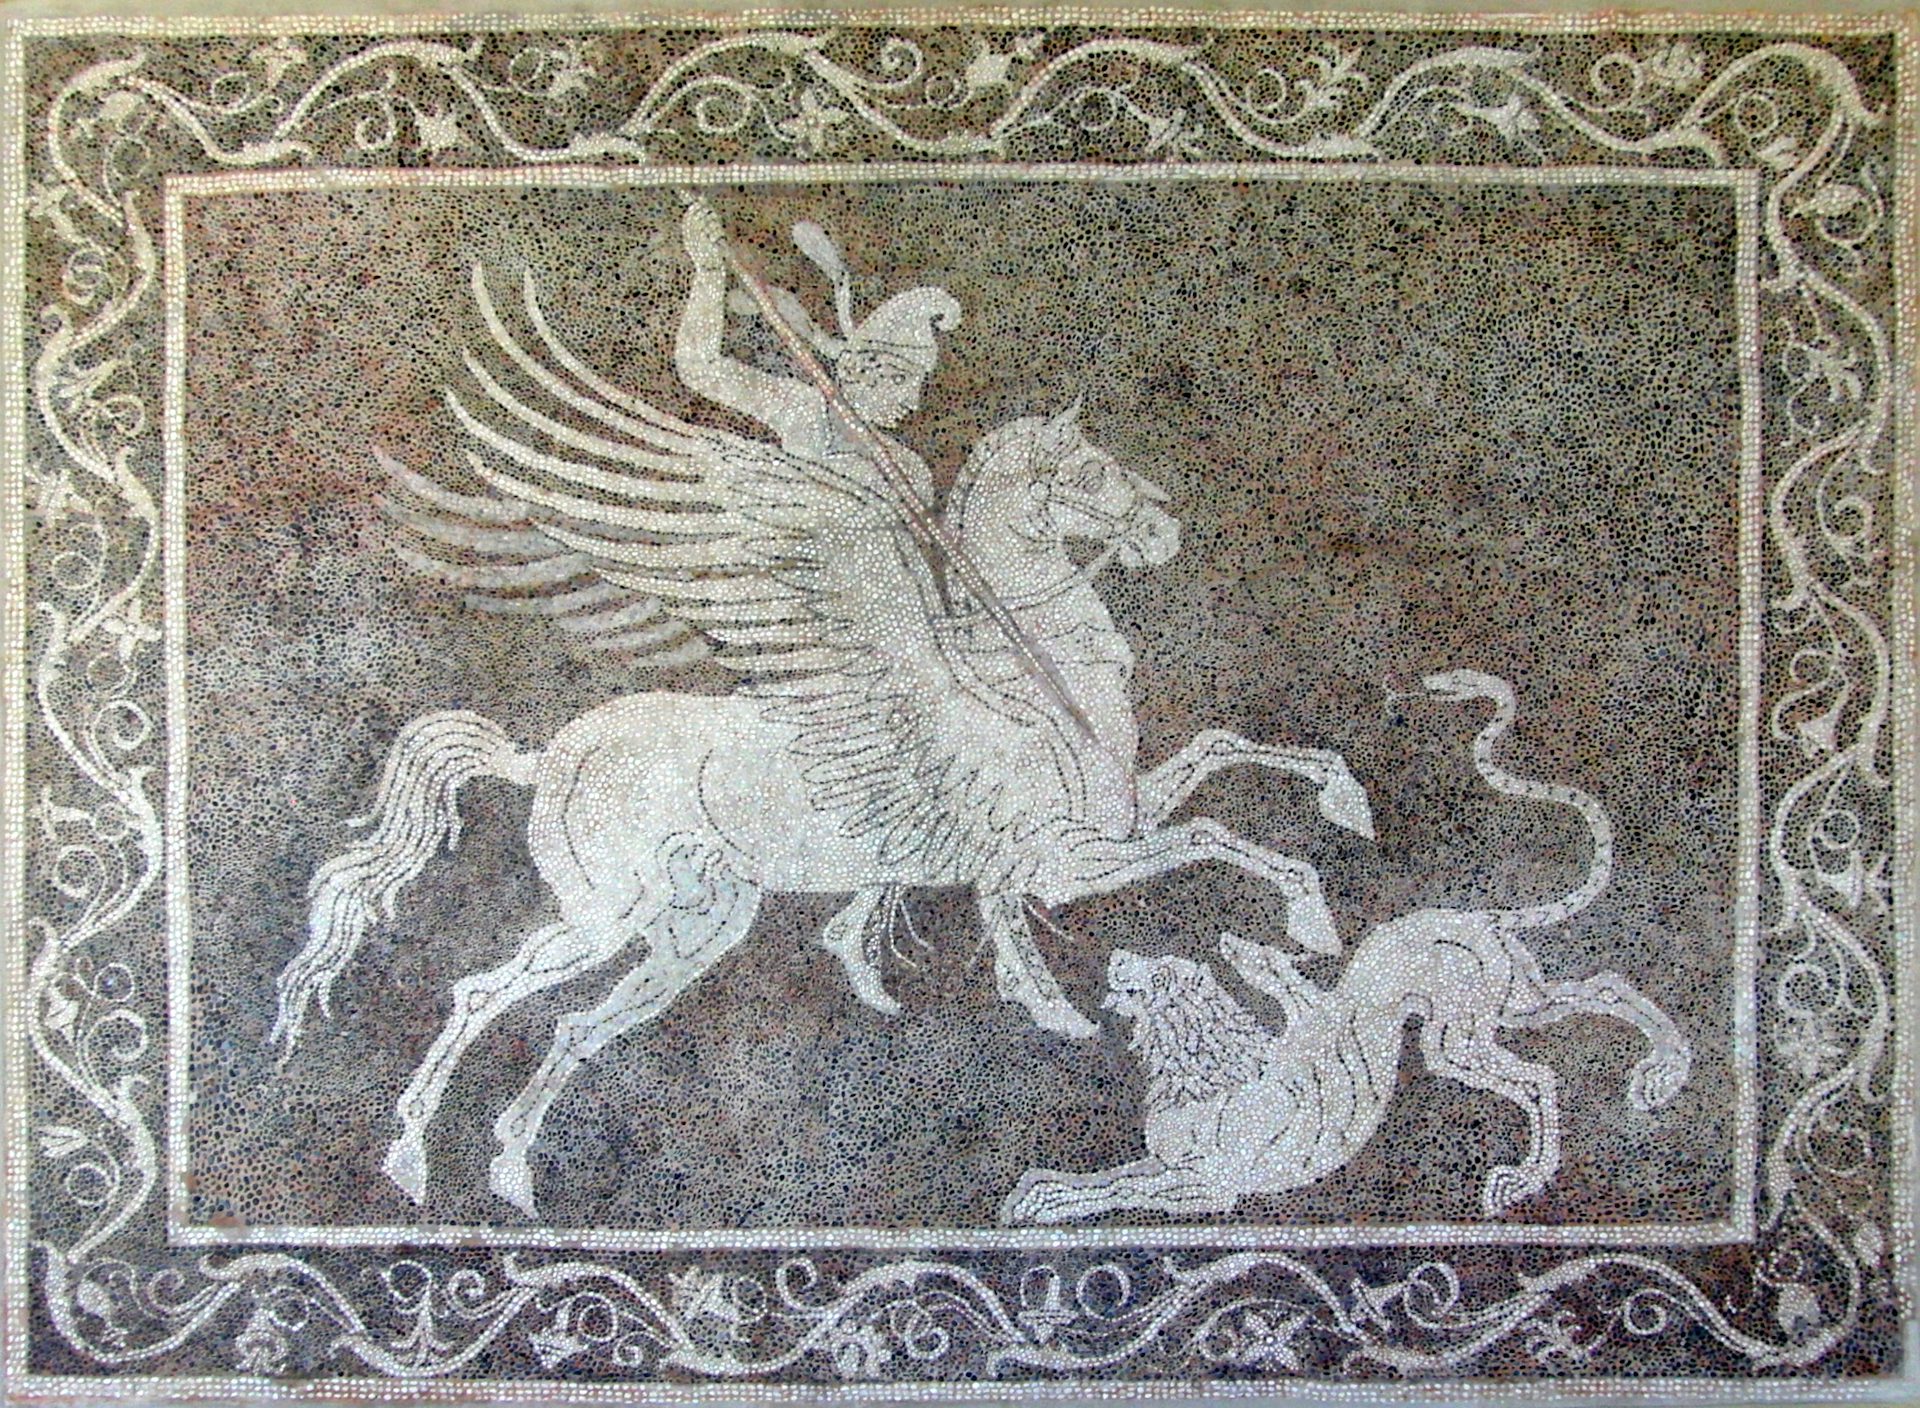 Mosaic of Bellerophon fighting the Chimera